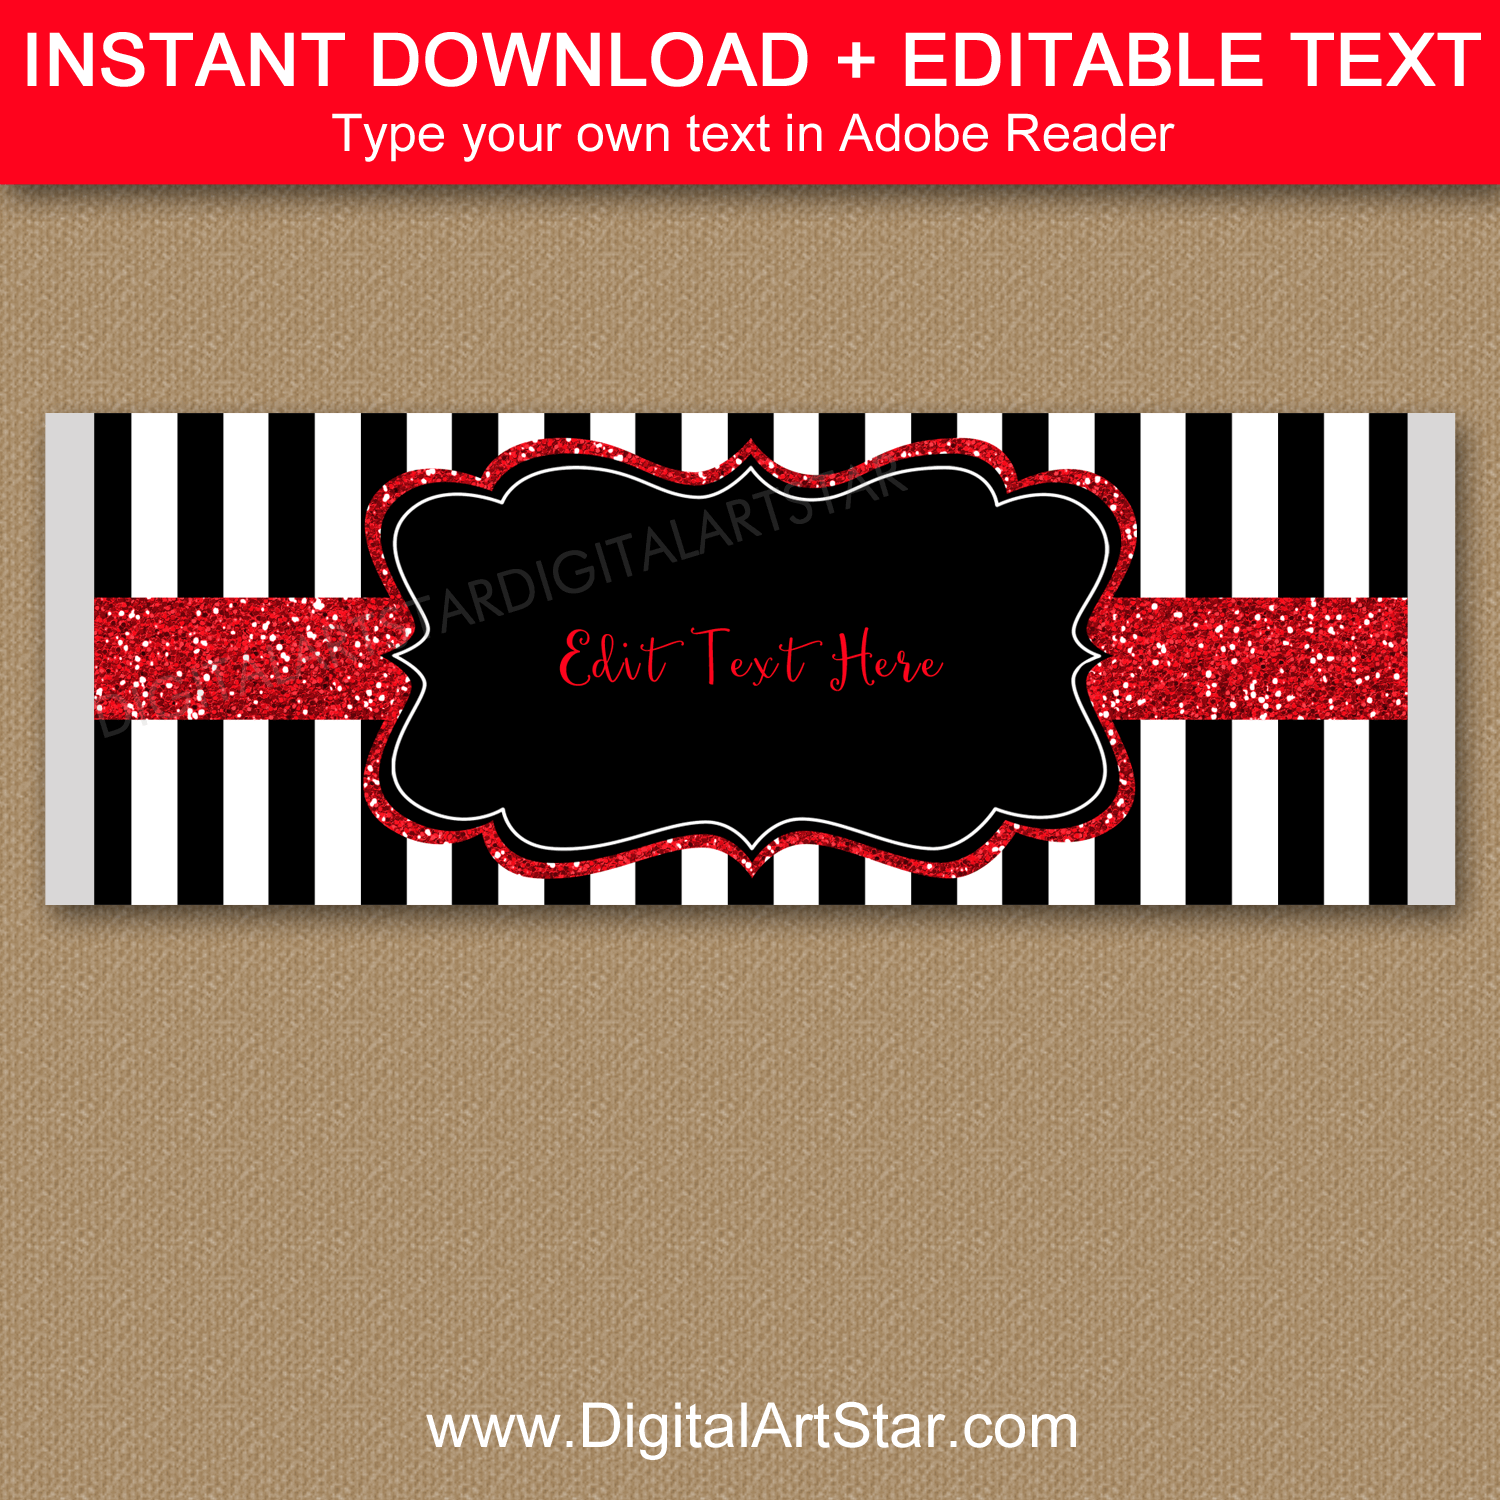 Black and White Striped Candy Bar Template with Red Glitter Accents